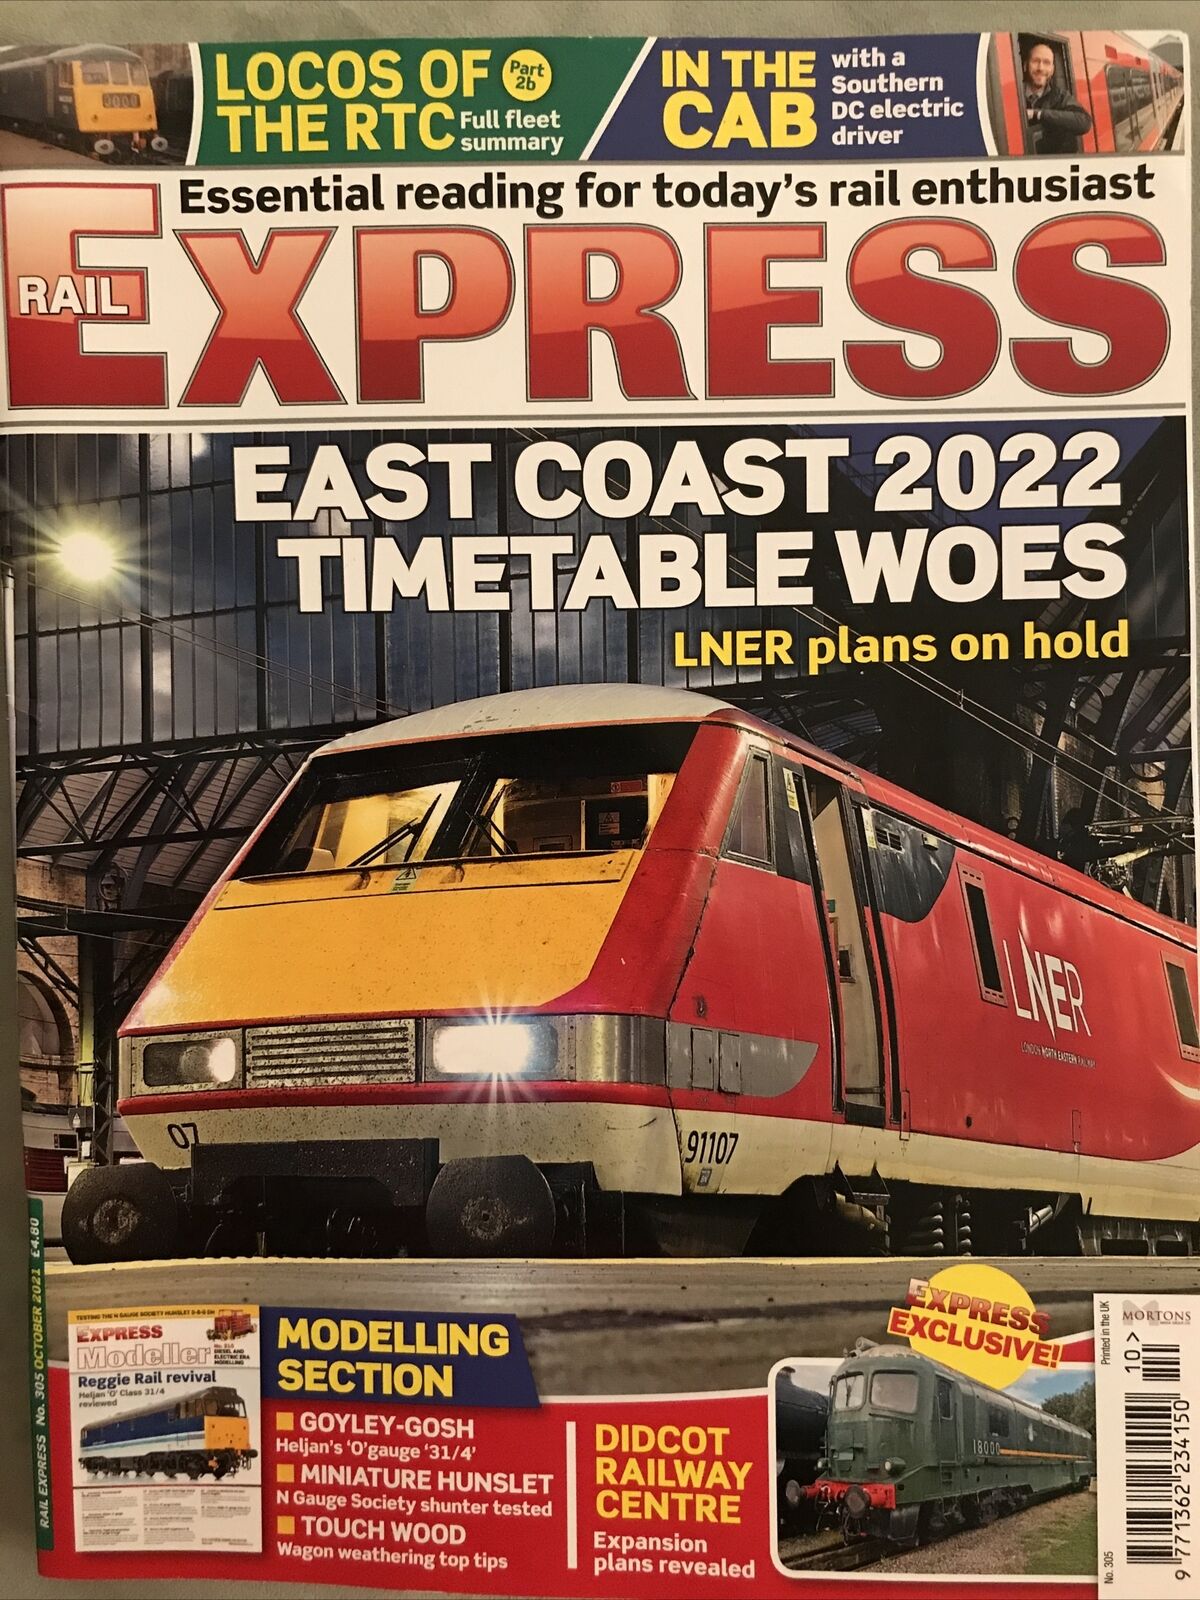 Rail Express Magazine Issue No 305 October 2021 Current Issue